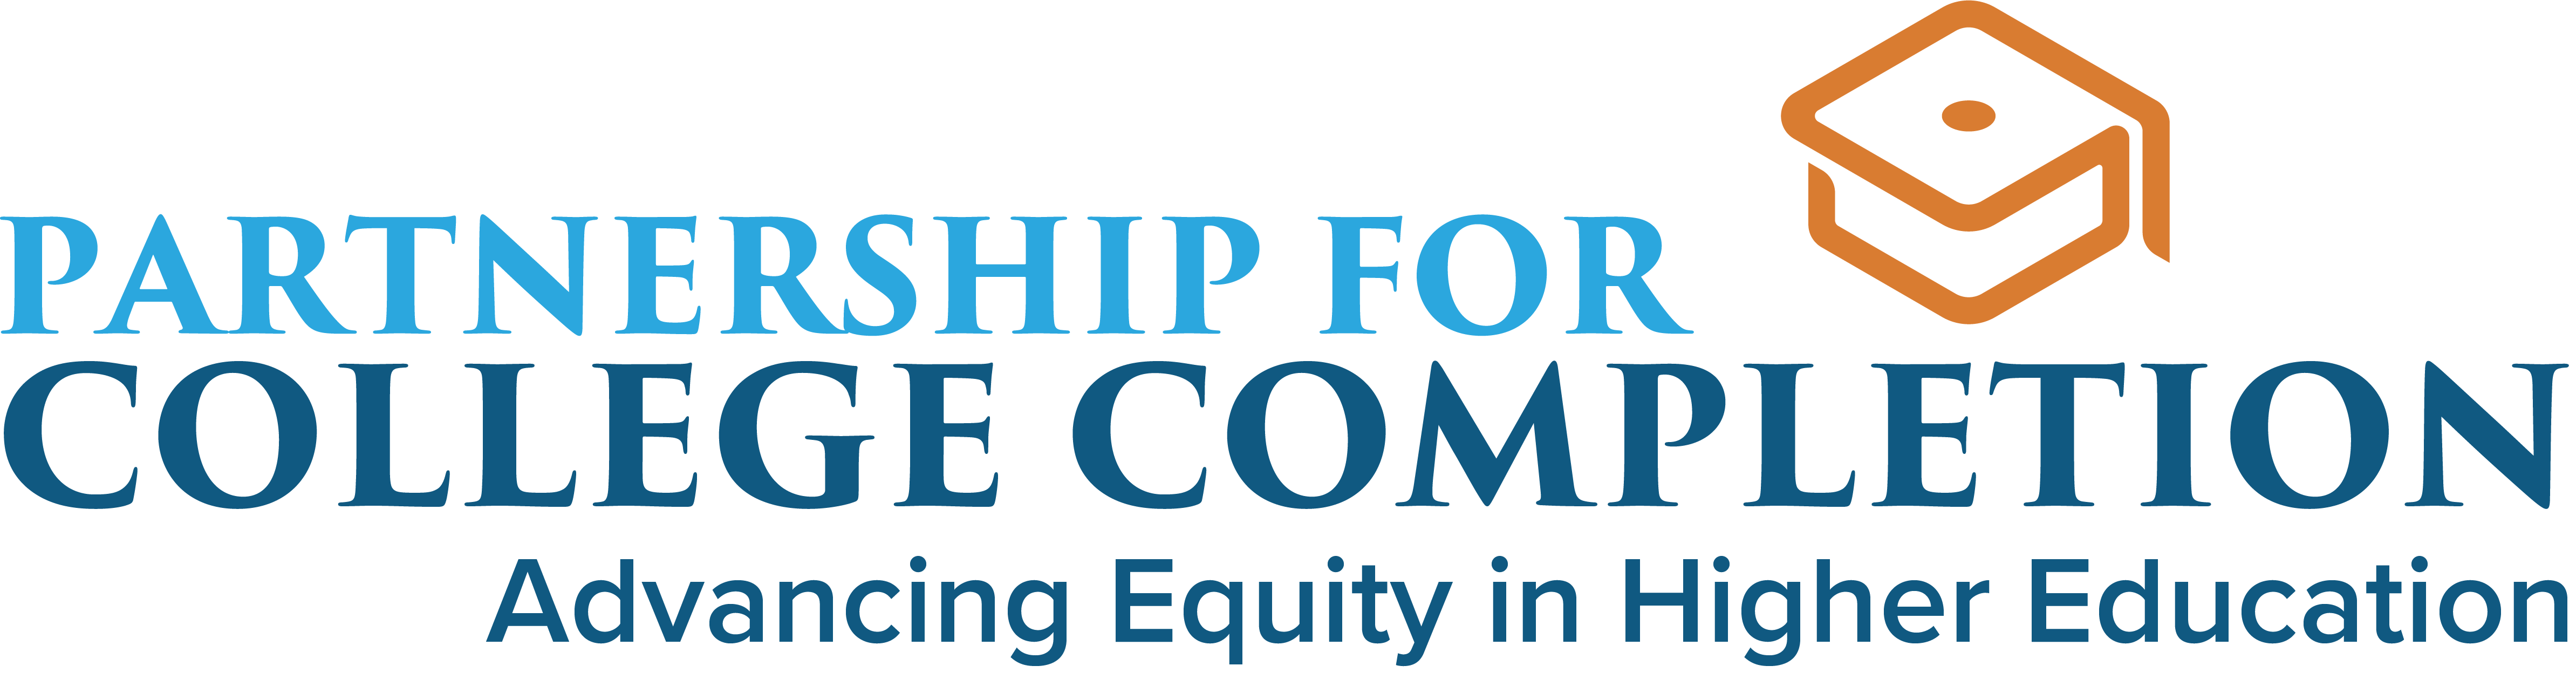 Partnership for College Completion logo